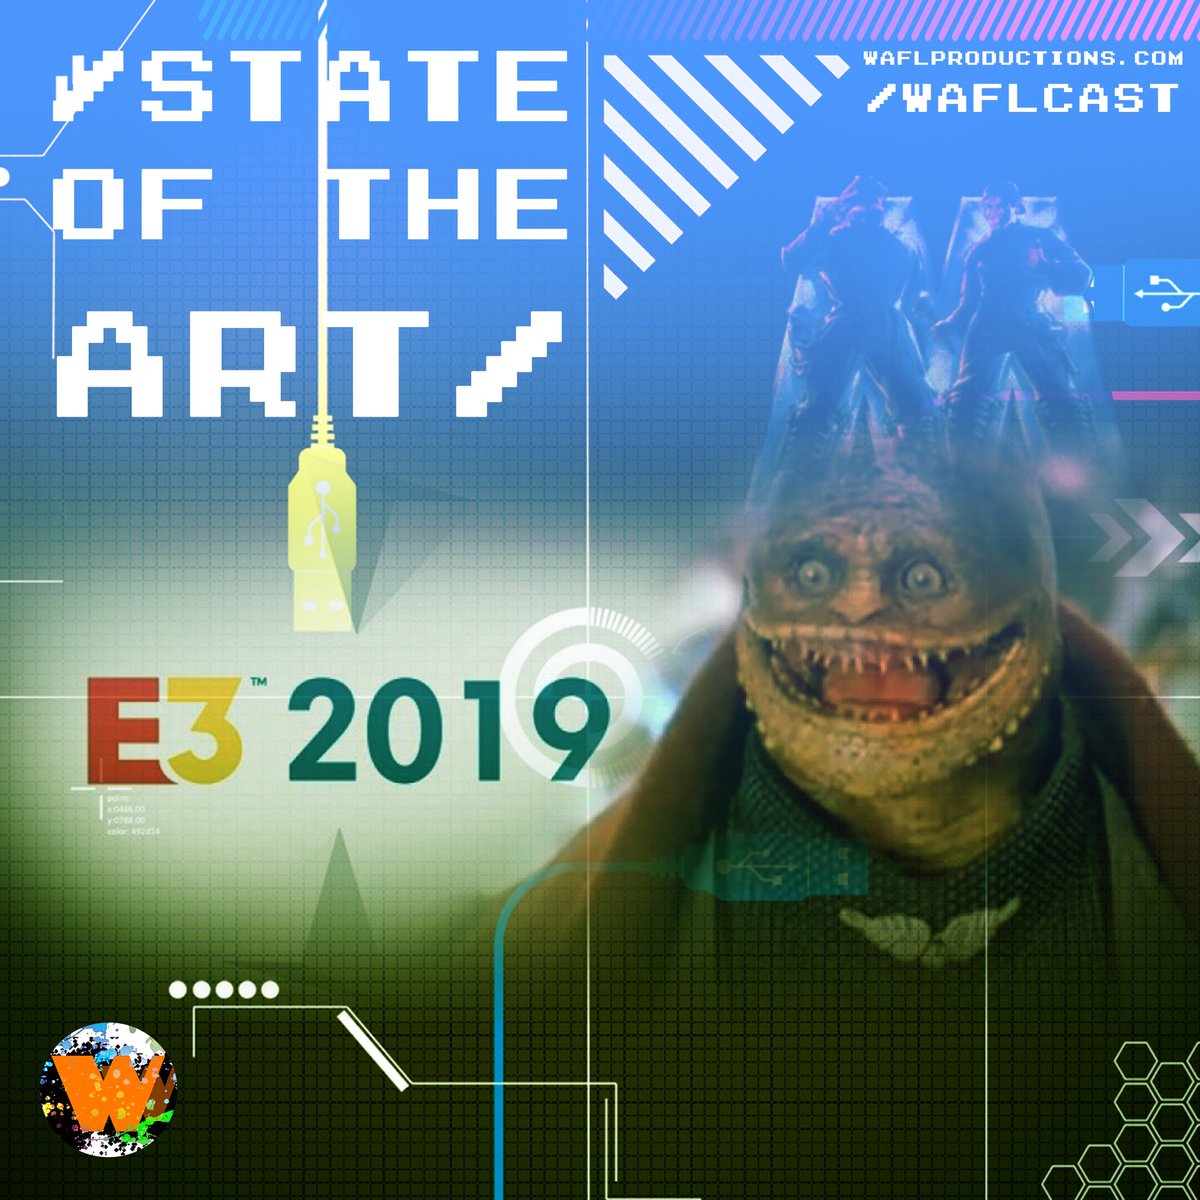 The latest WAFLcast brings the goods. Odd and breaking news, insider entertainment breakdowns and tech talk. All with the #NSFW seal of approval!

On all platforms at waflproductions.com/waflcast. Link in bio.

#e32019 #podernfamily #podsunited #podsquad #comedy #comics #gaming